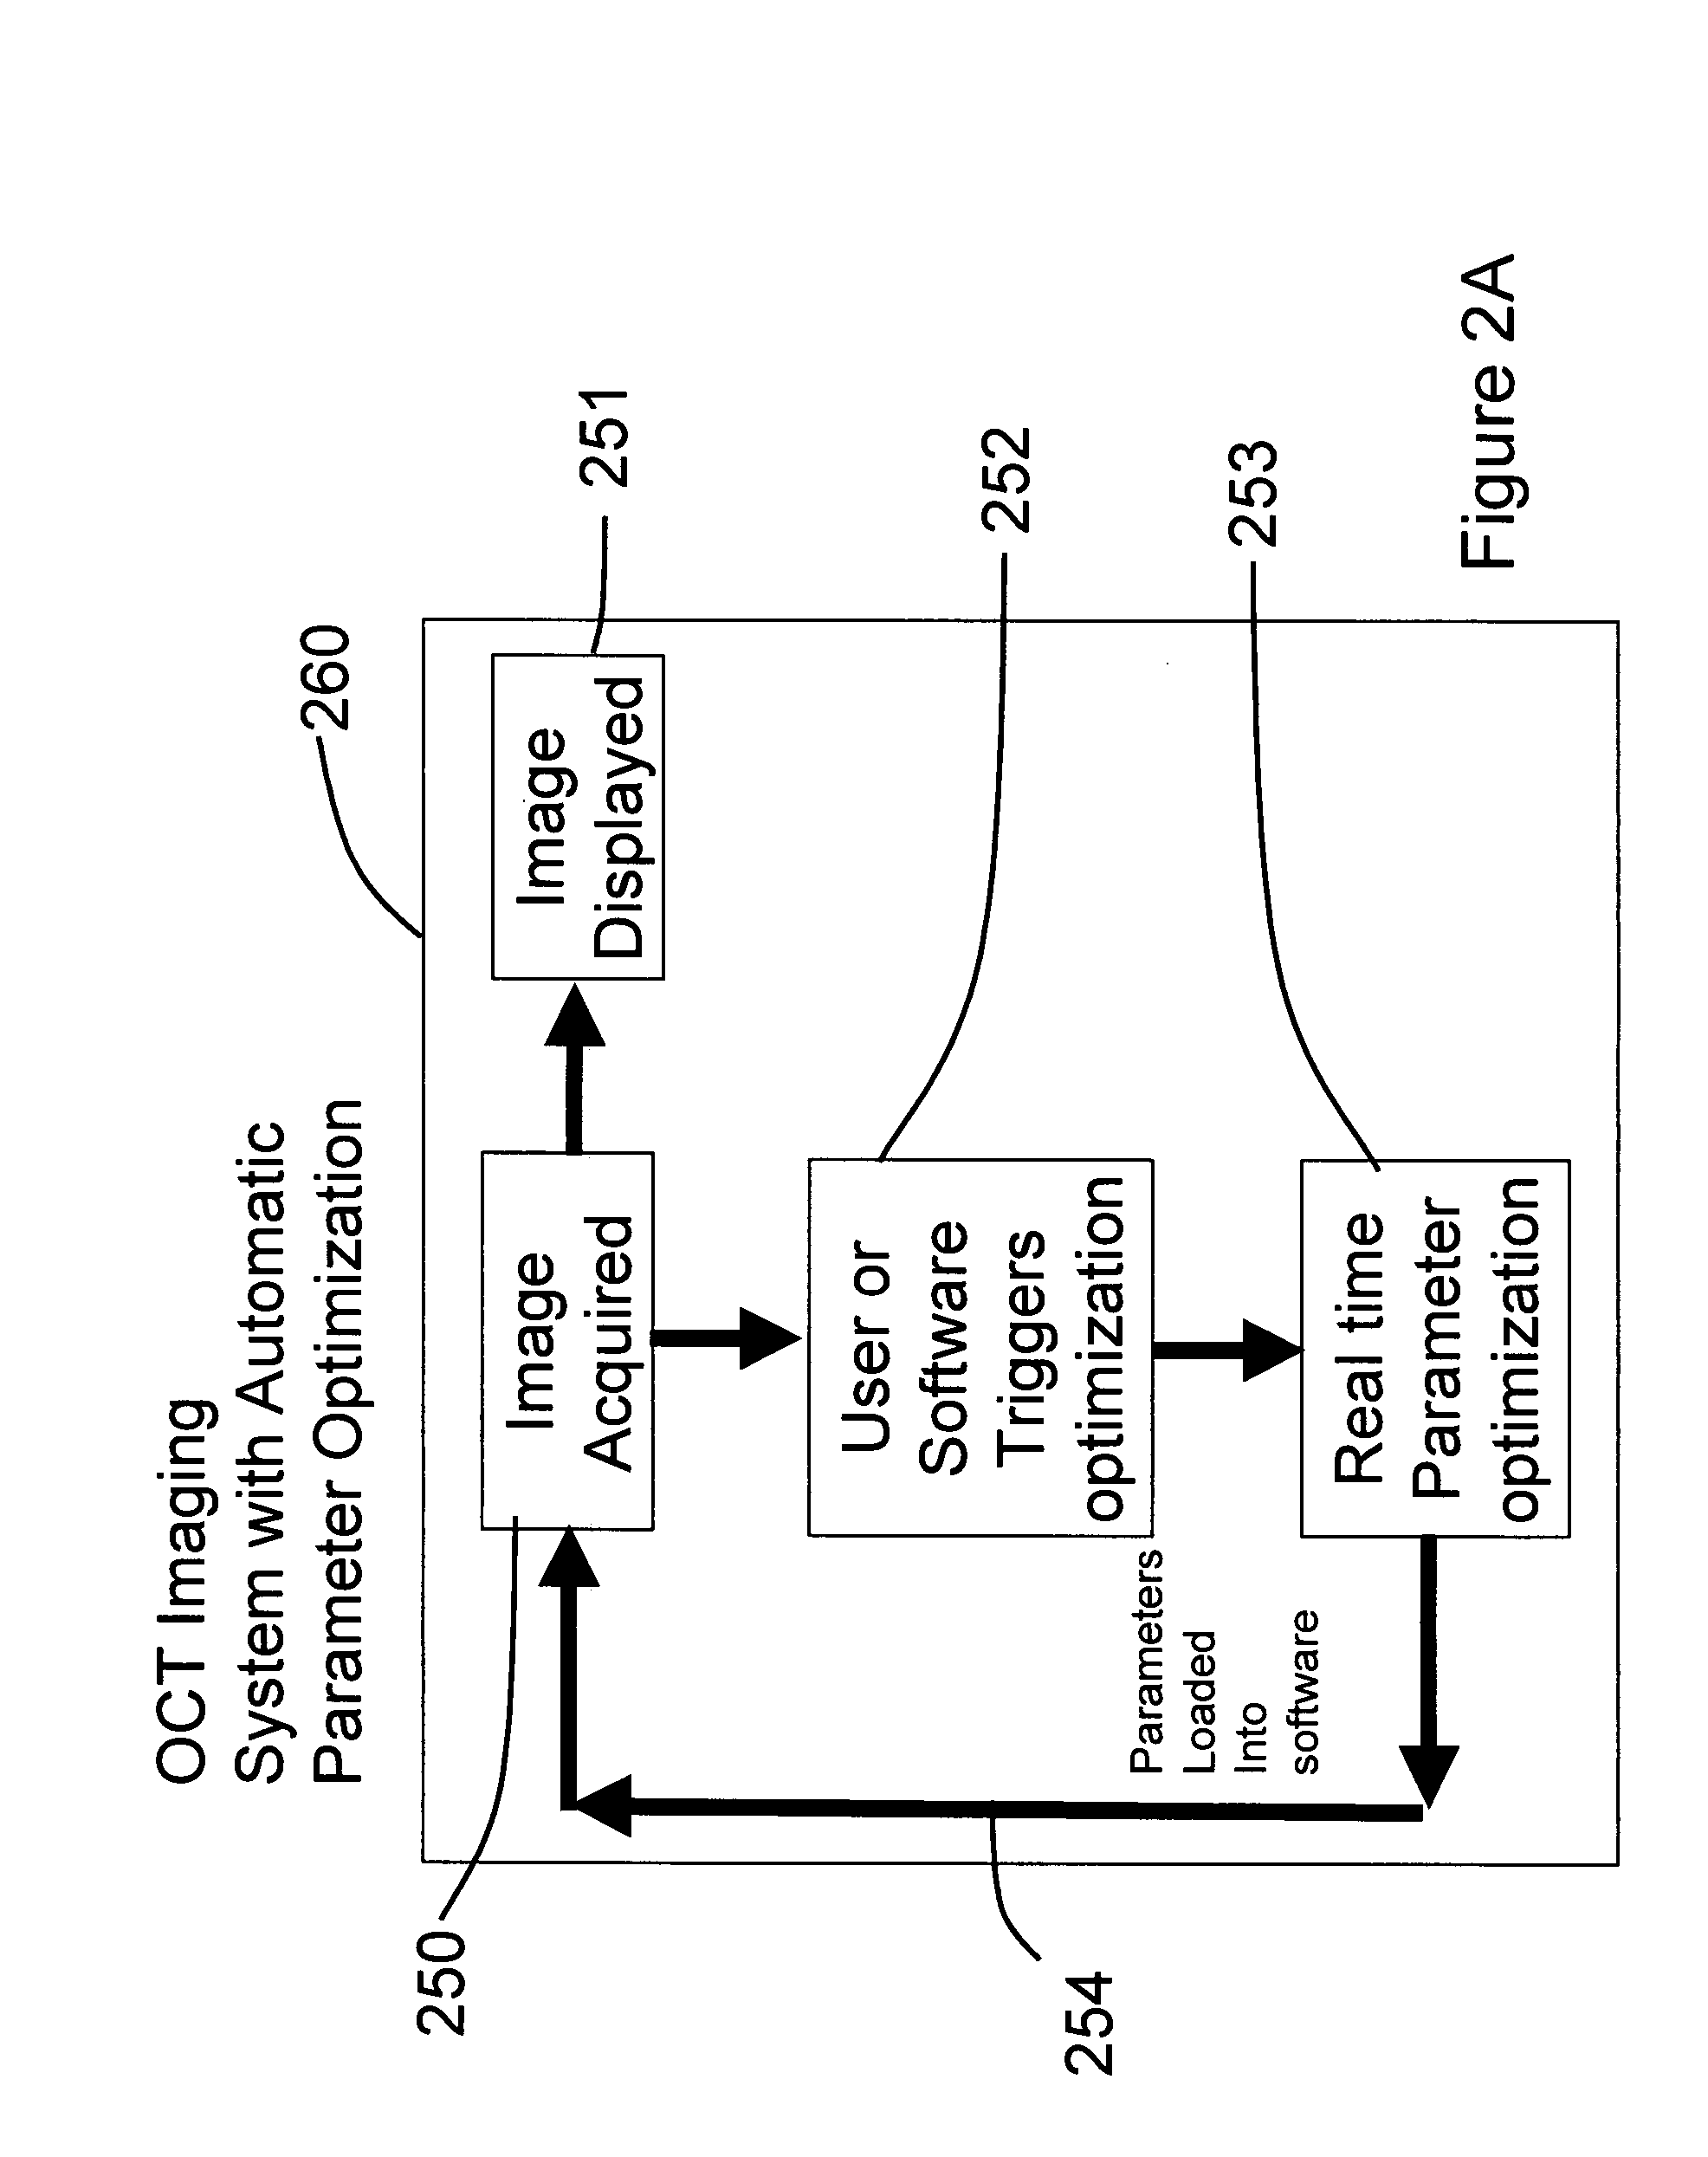 Methods, systems and computer program products for optical coherence tomography (OCT) using automatic dispersion compensation